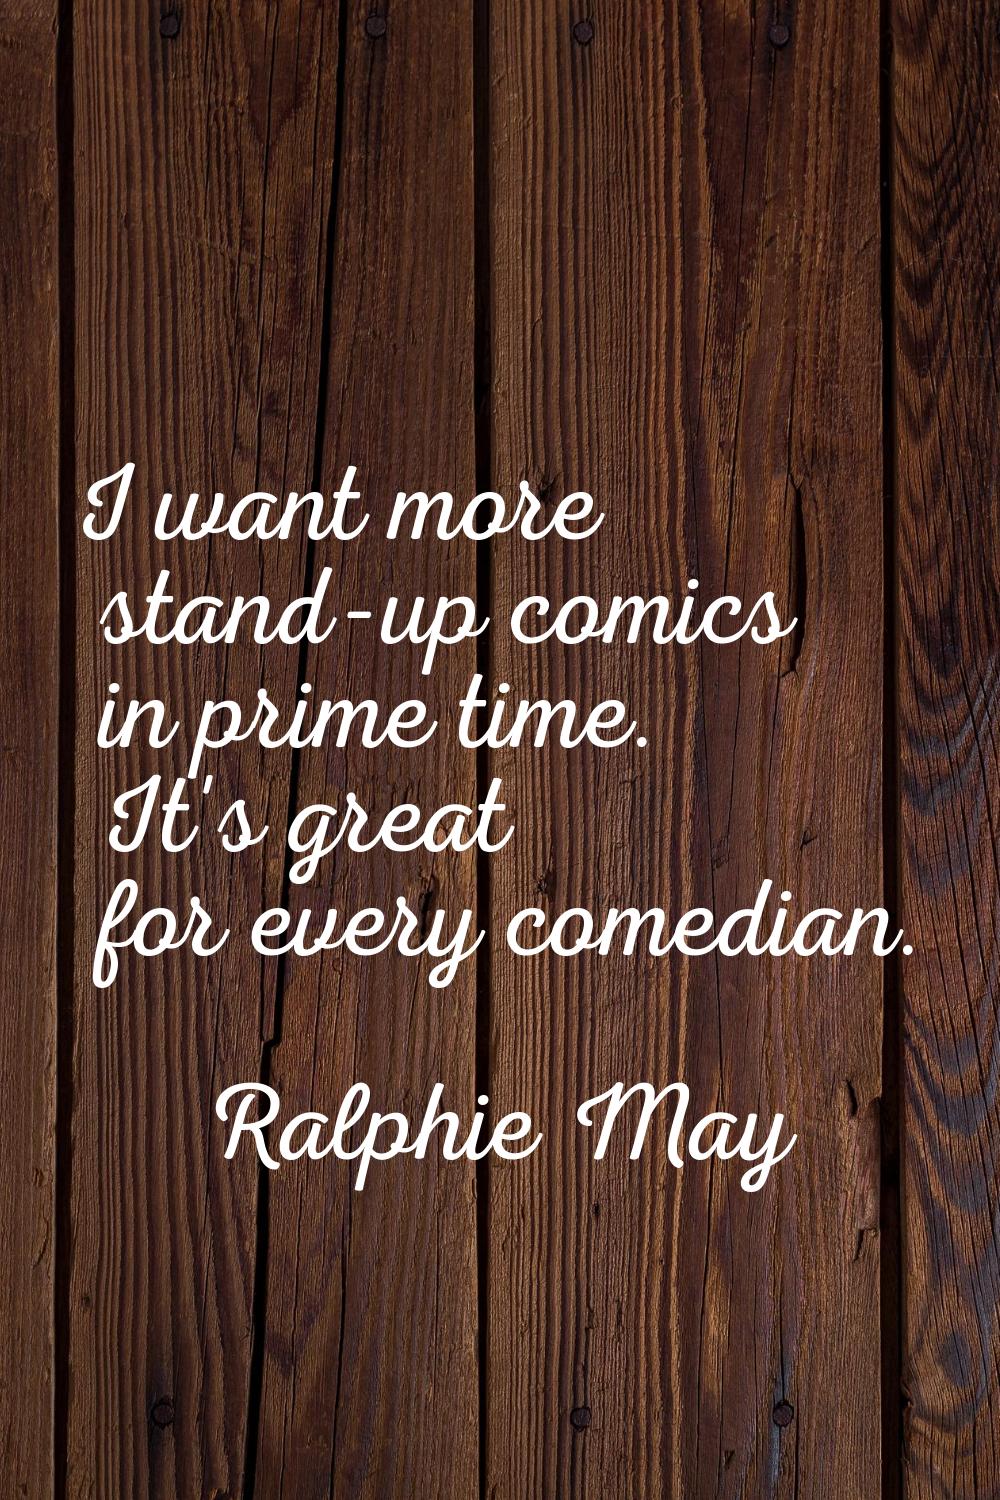 I want more stand-up comics in prime time. It's great for every comedian.